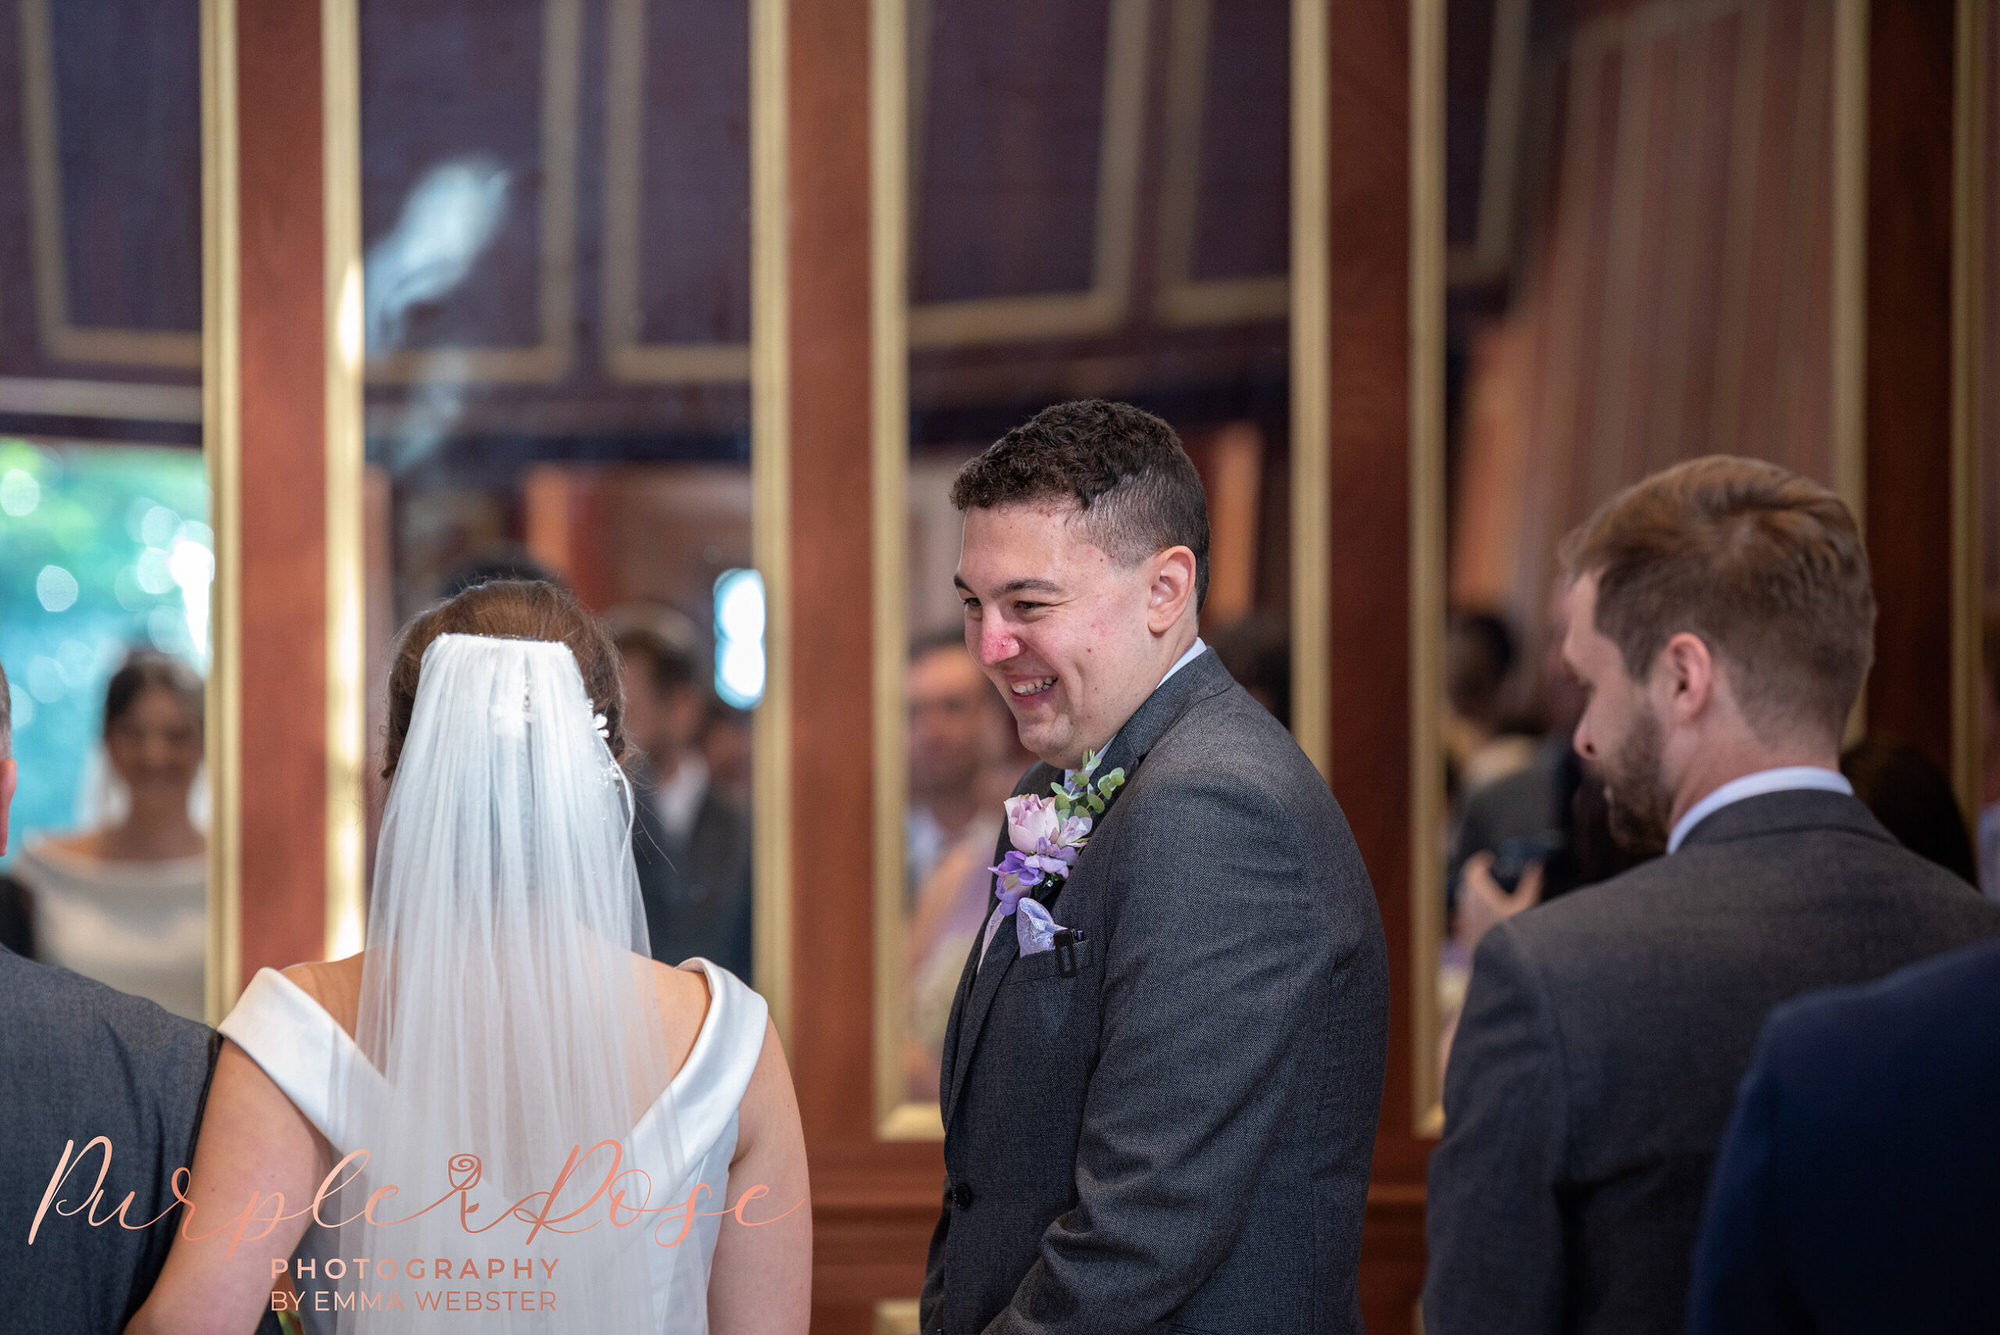 Groom laughing during wedding ceremony